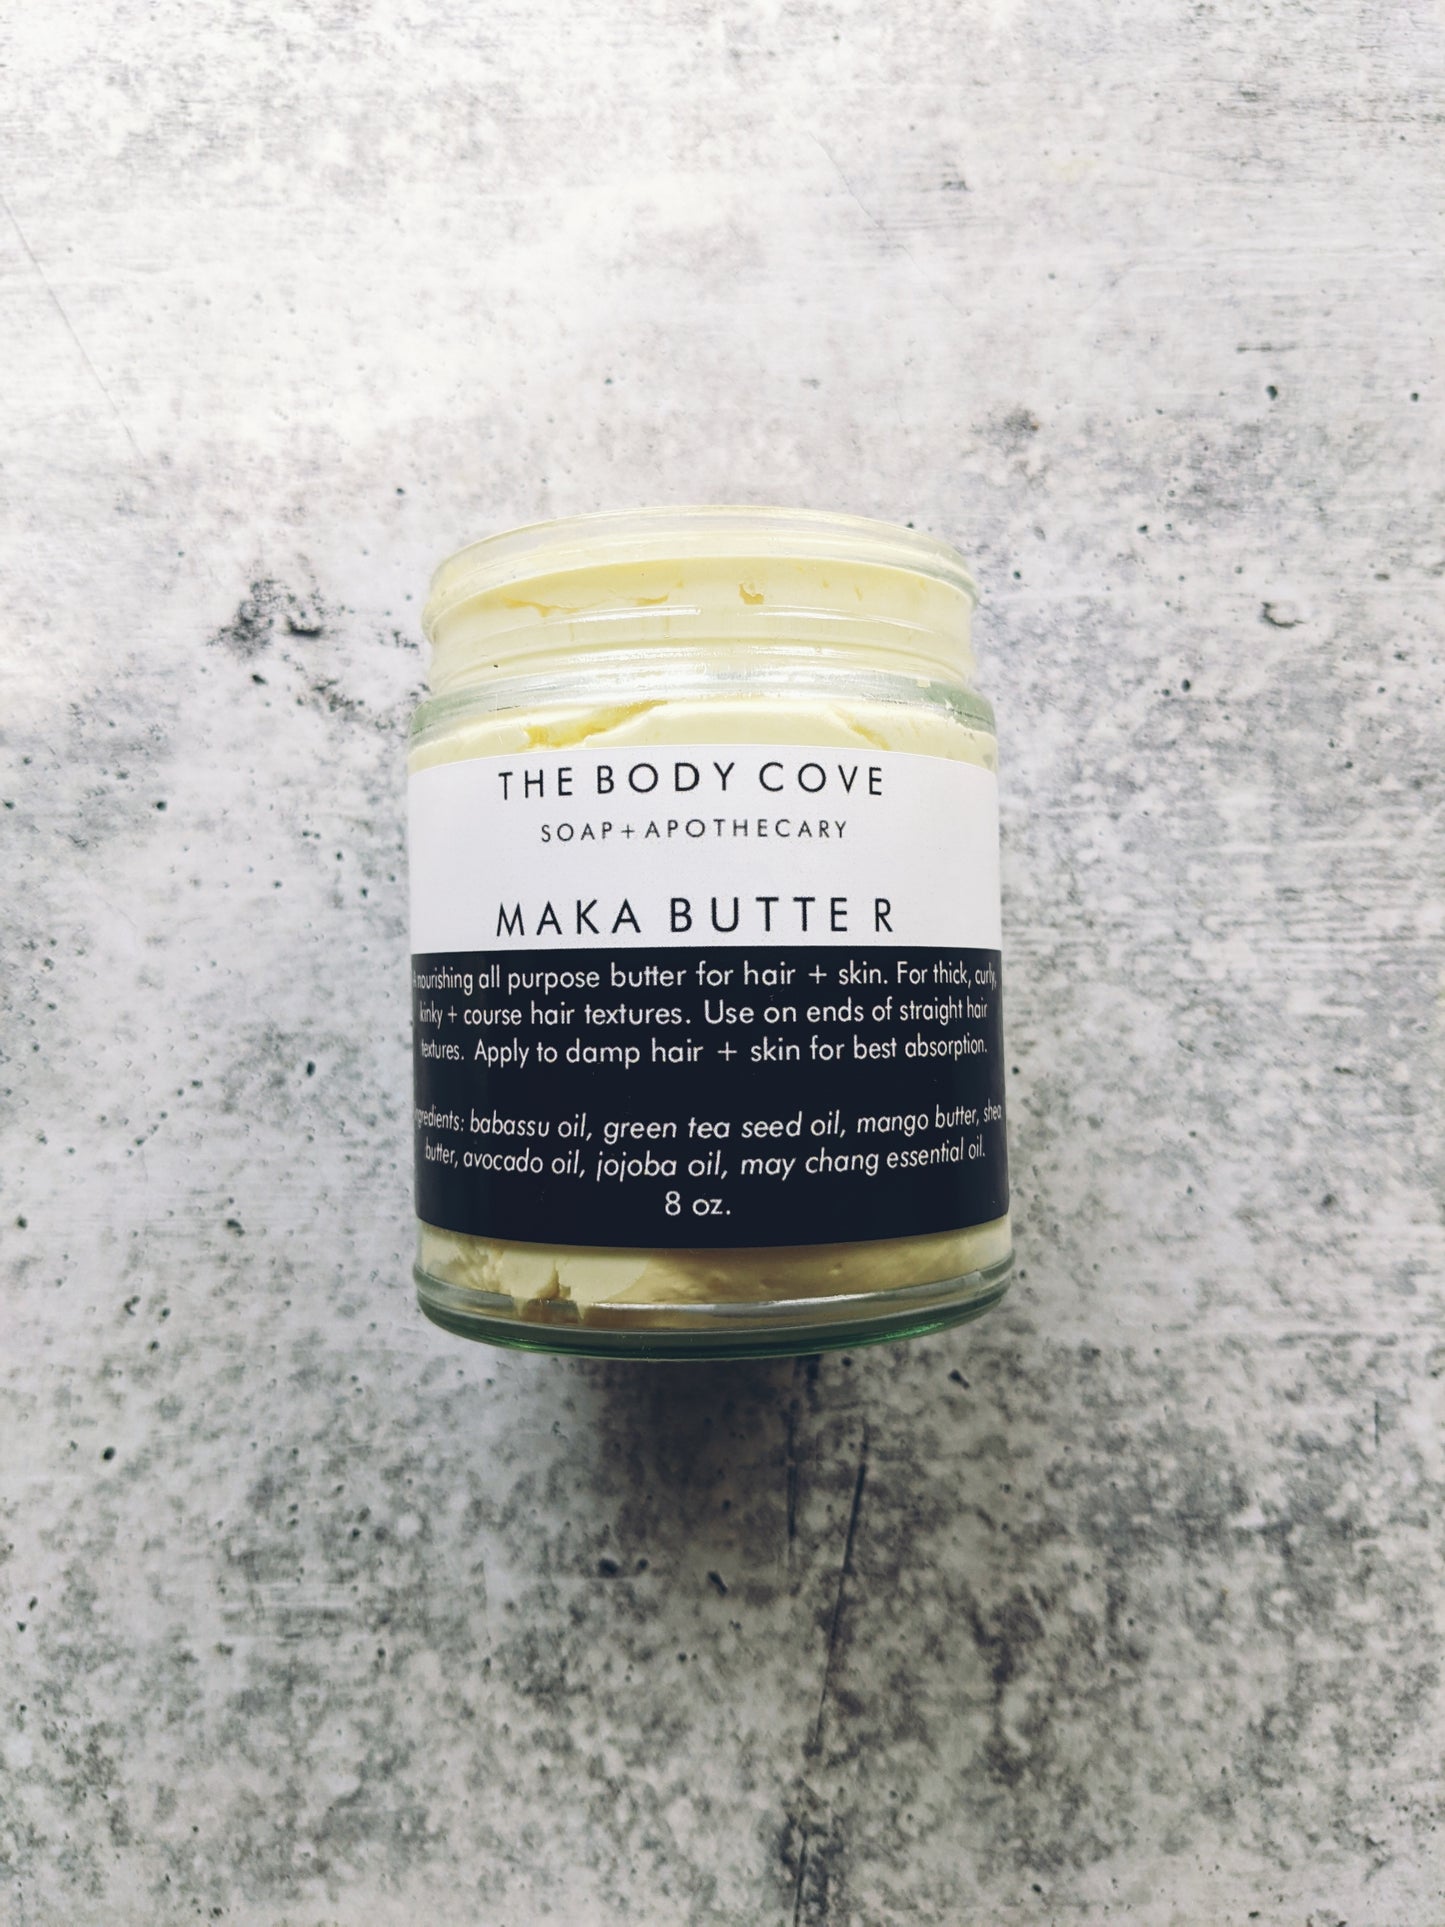 DISCONTINUED: MAKA BUTTER